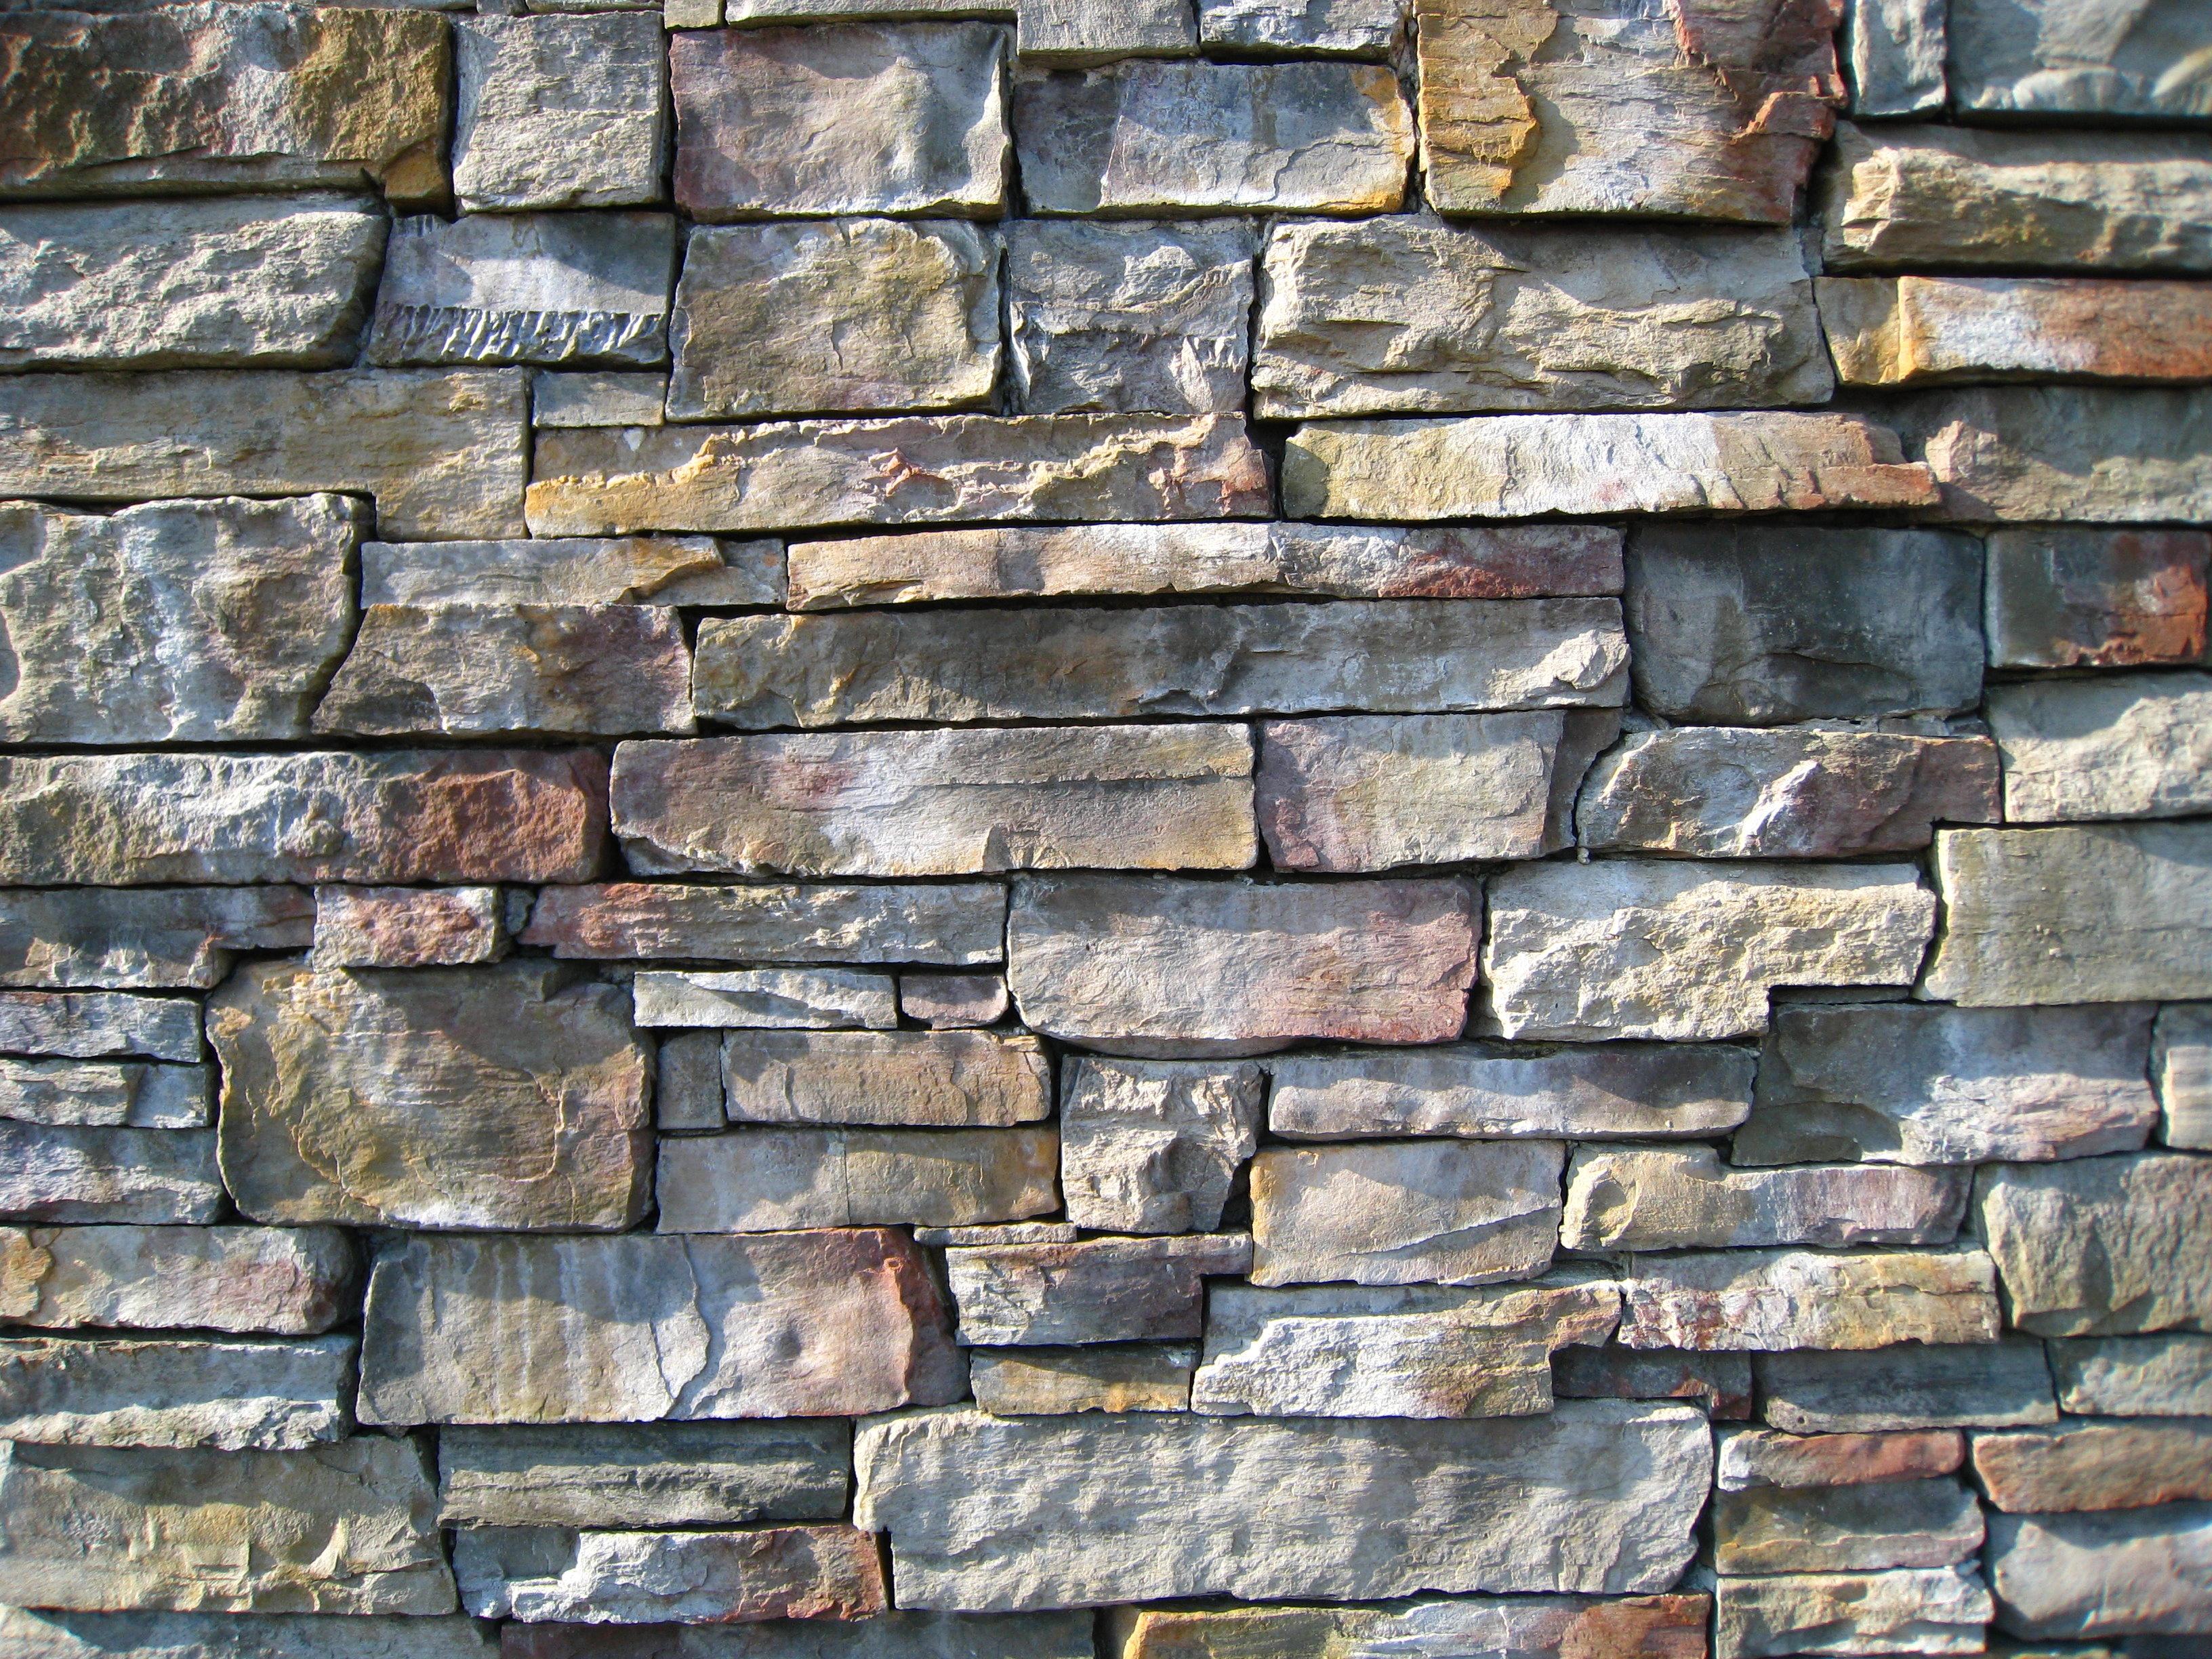 What Are The Benefits Of Using Natural Stone Thin Veneer | Natural Stone...  an Environmentally Sound Foundation